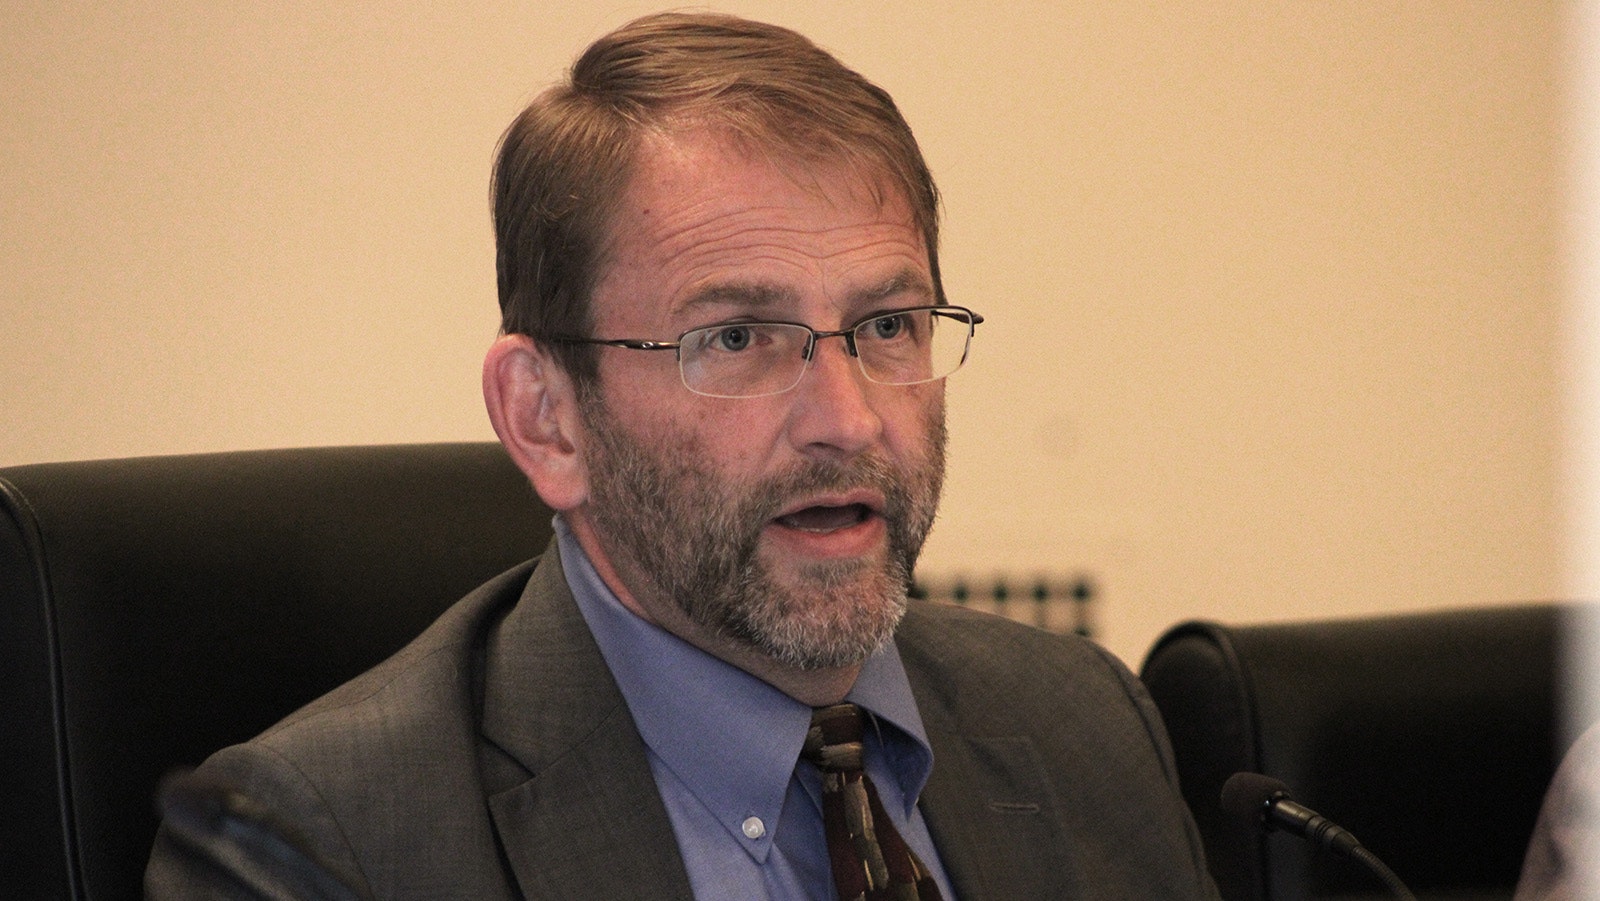 State Sen. Chris Rothfuss, D-Laramie, was one of the most vocal opponents of a draft bill that would change parent notification by schools for health issues.